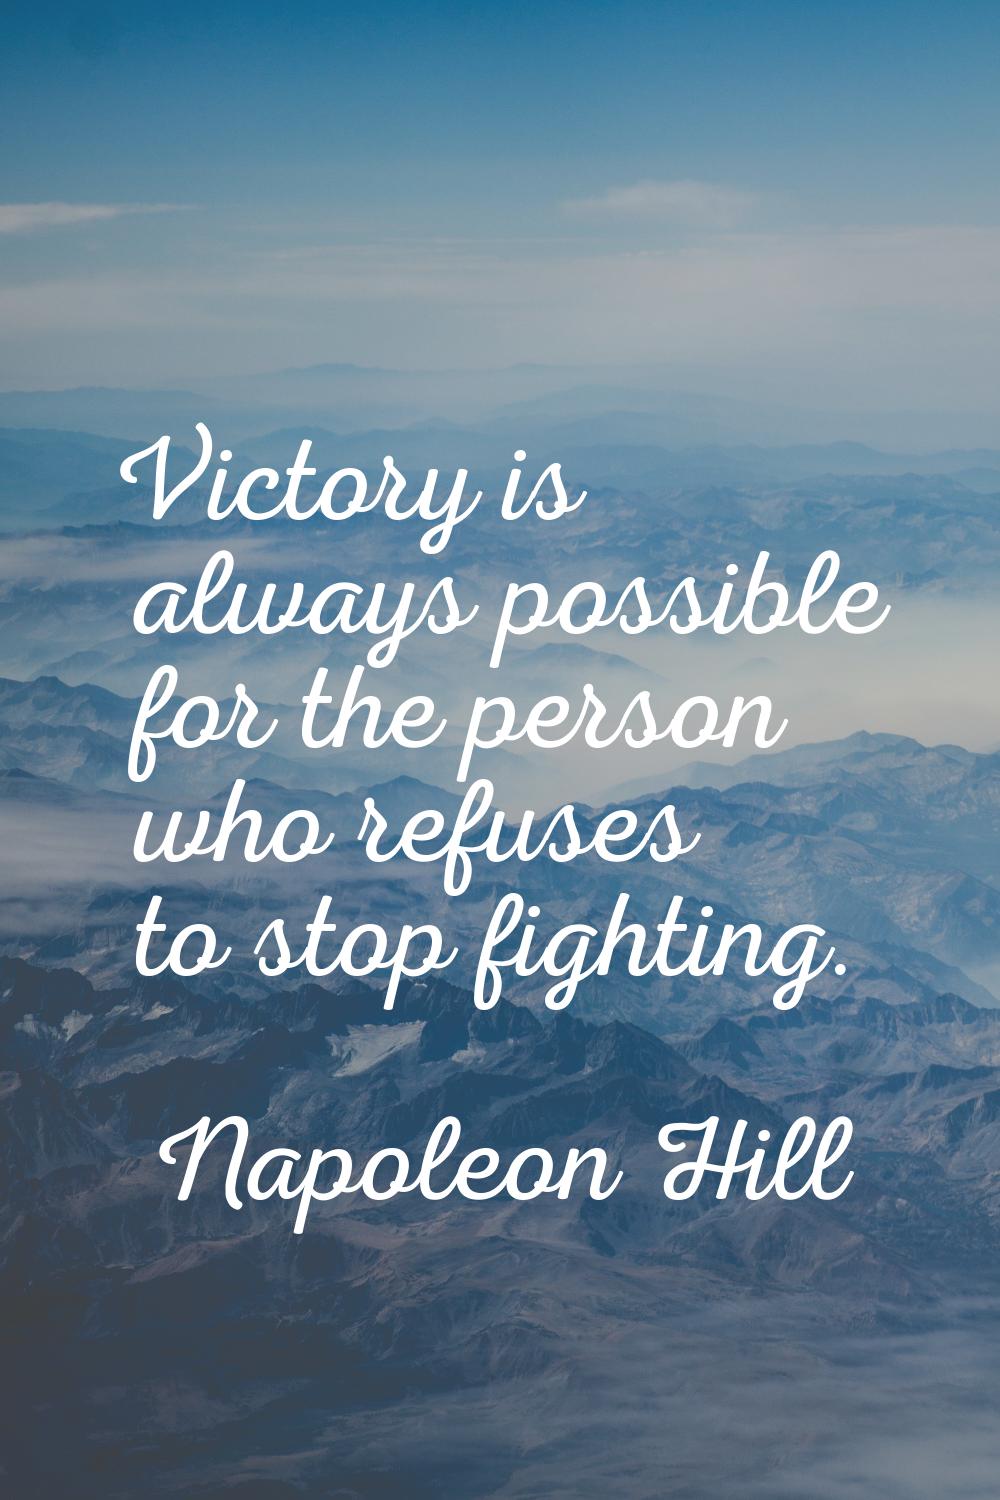 Victory is always possible for the person who refuses to stop fighting.